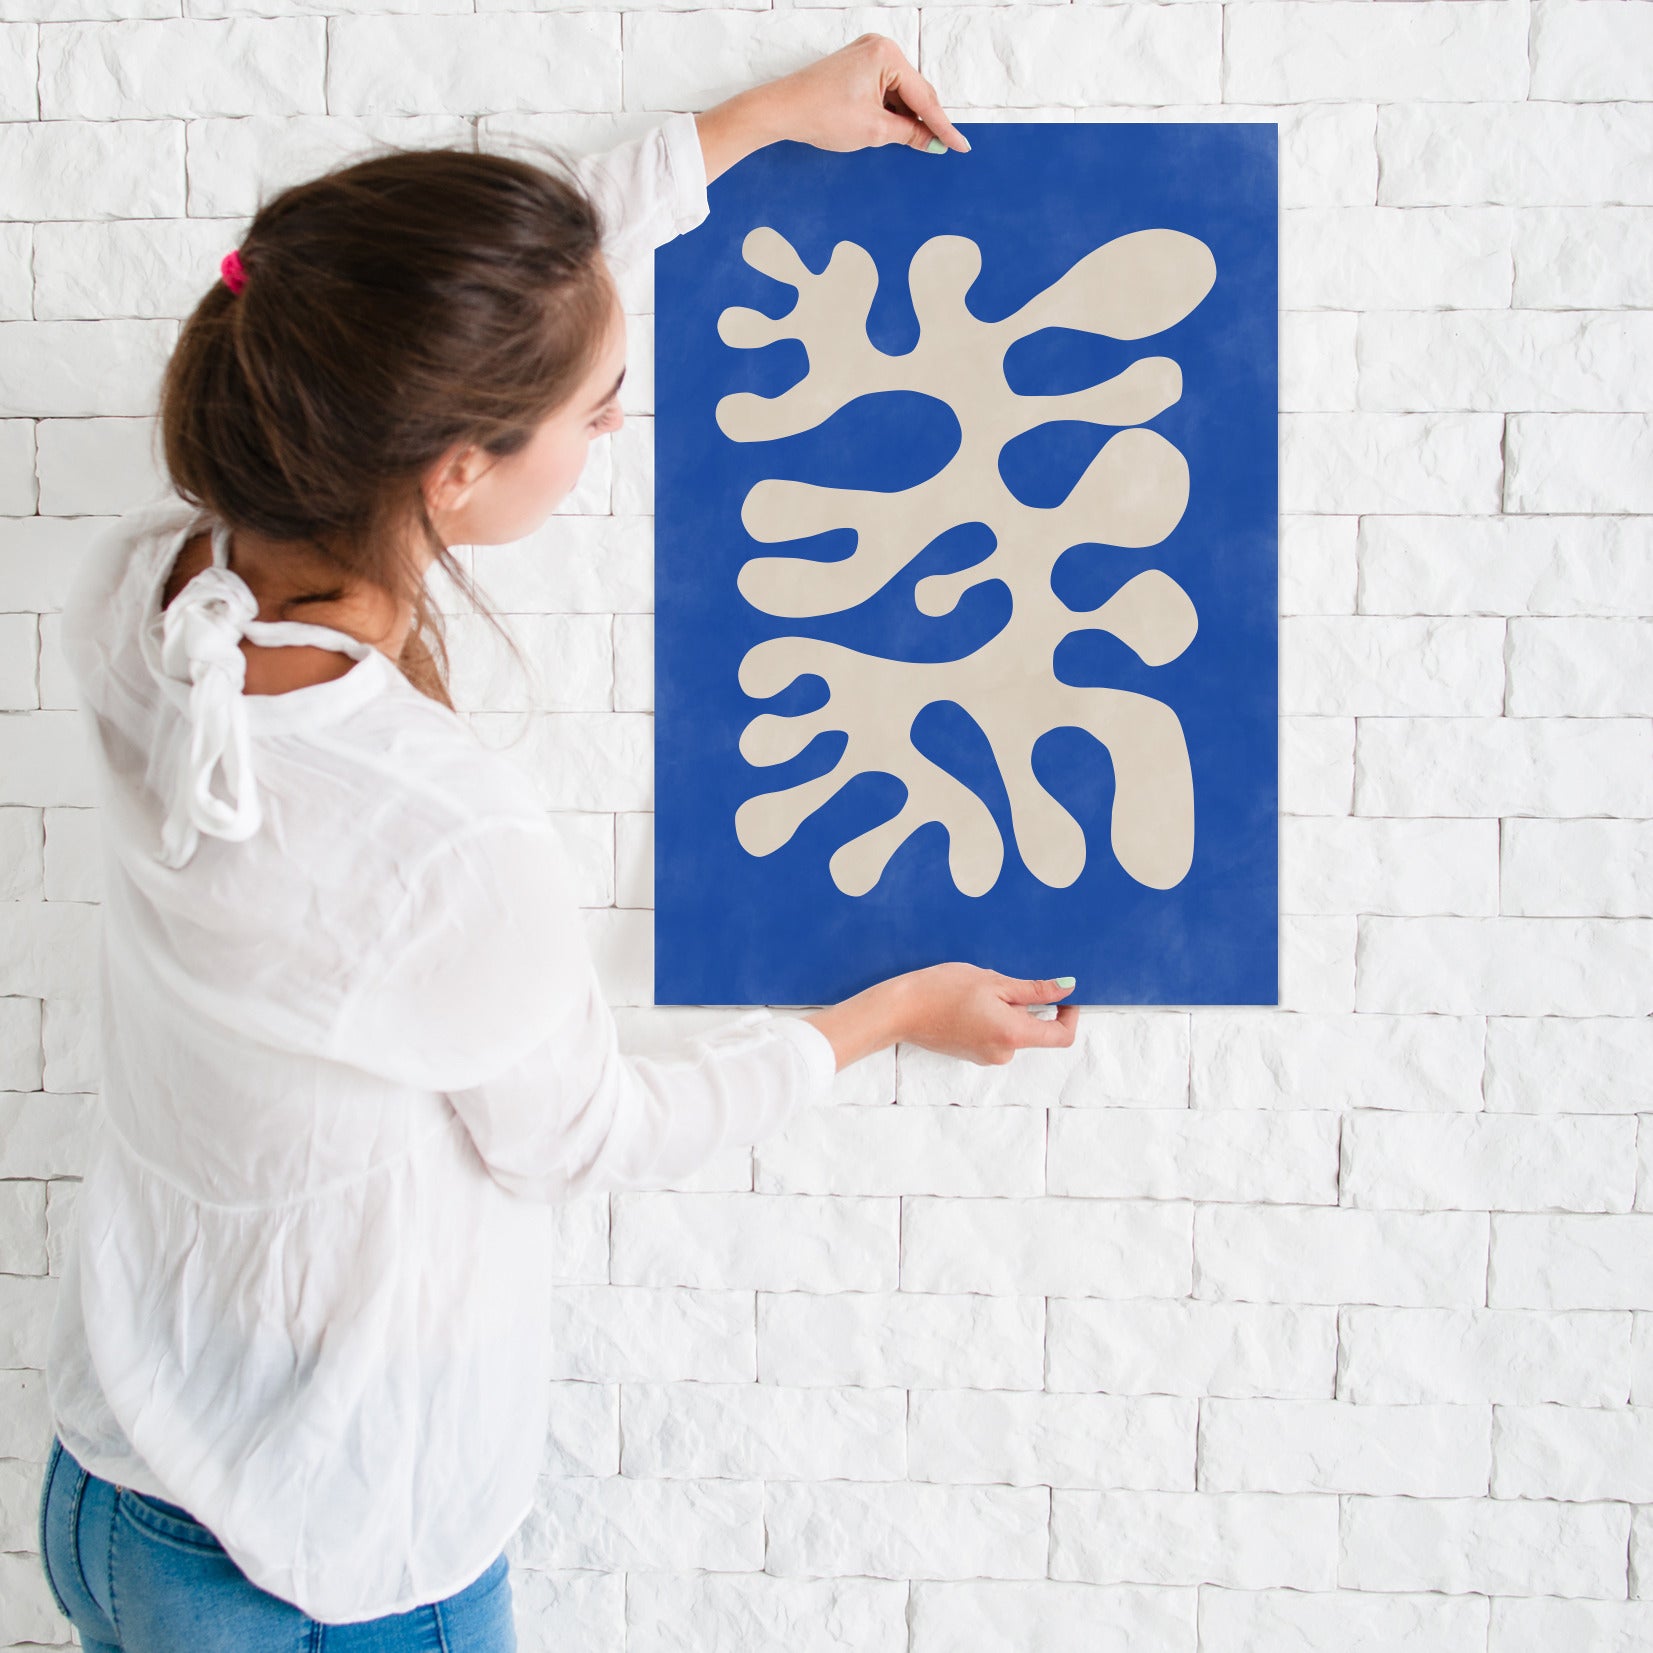 Matisse Inspired Abstract 1 by The Print Republic - Canvas, Poster or Framed Print